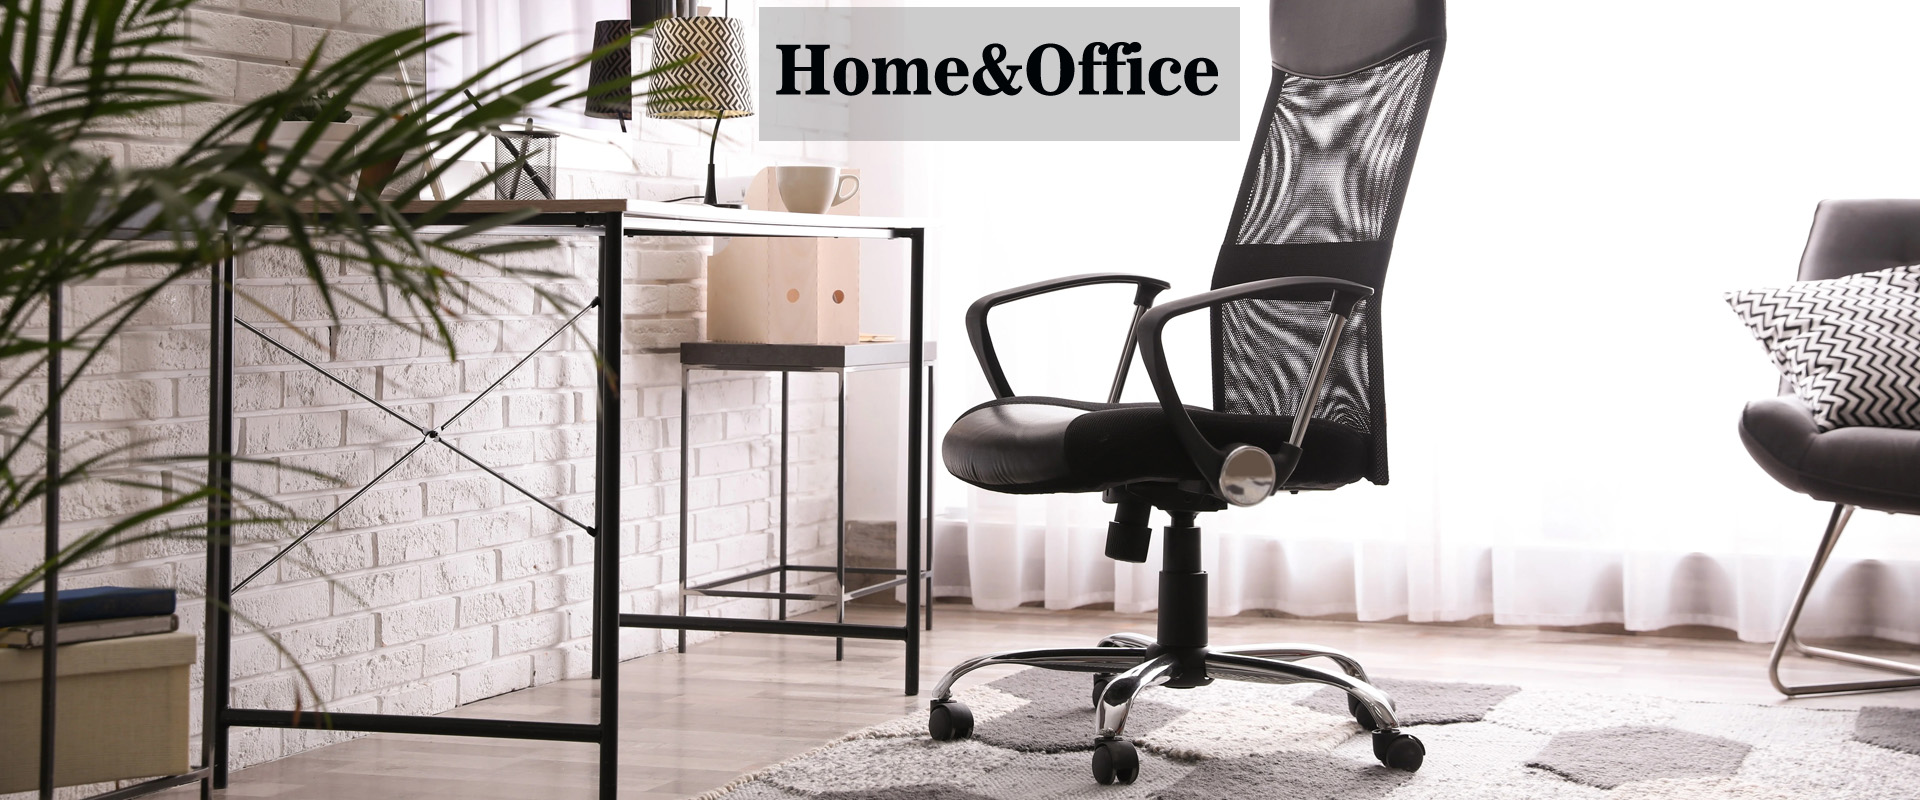 Home&Office